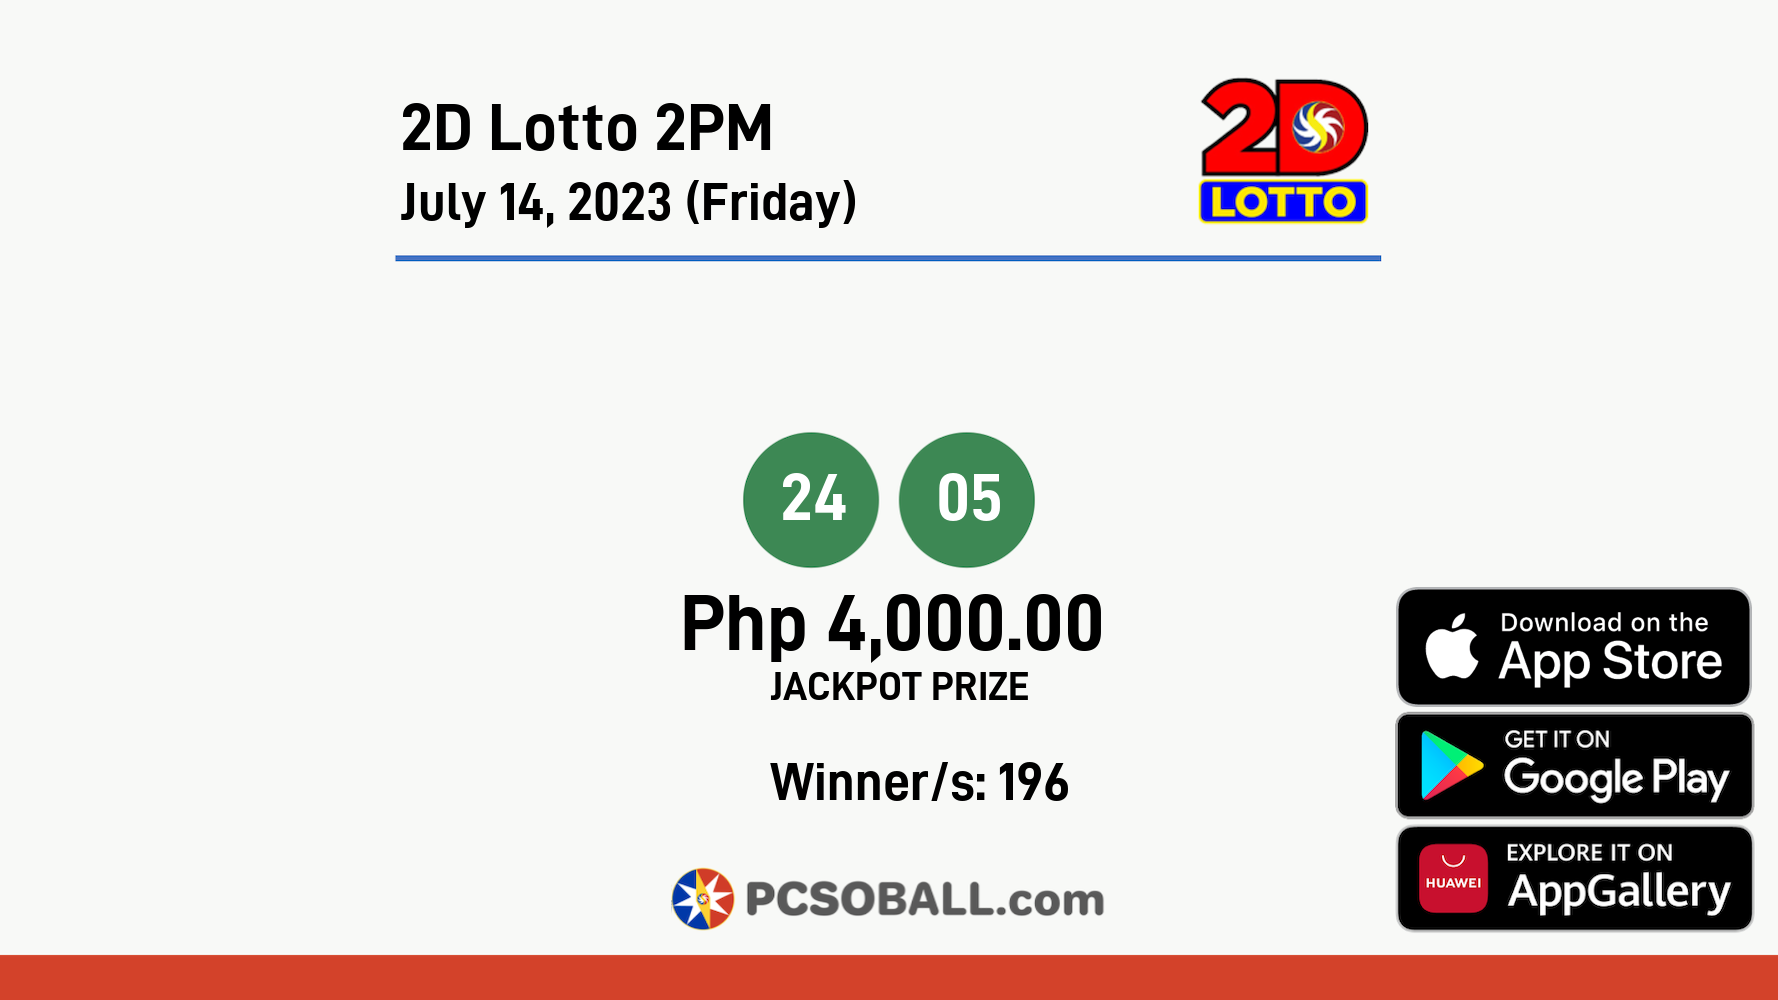 2D Lotto 2PM July 14, 2023 (Friday) Result